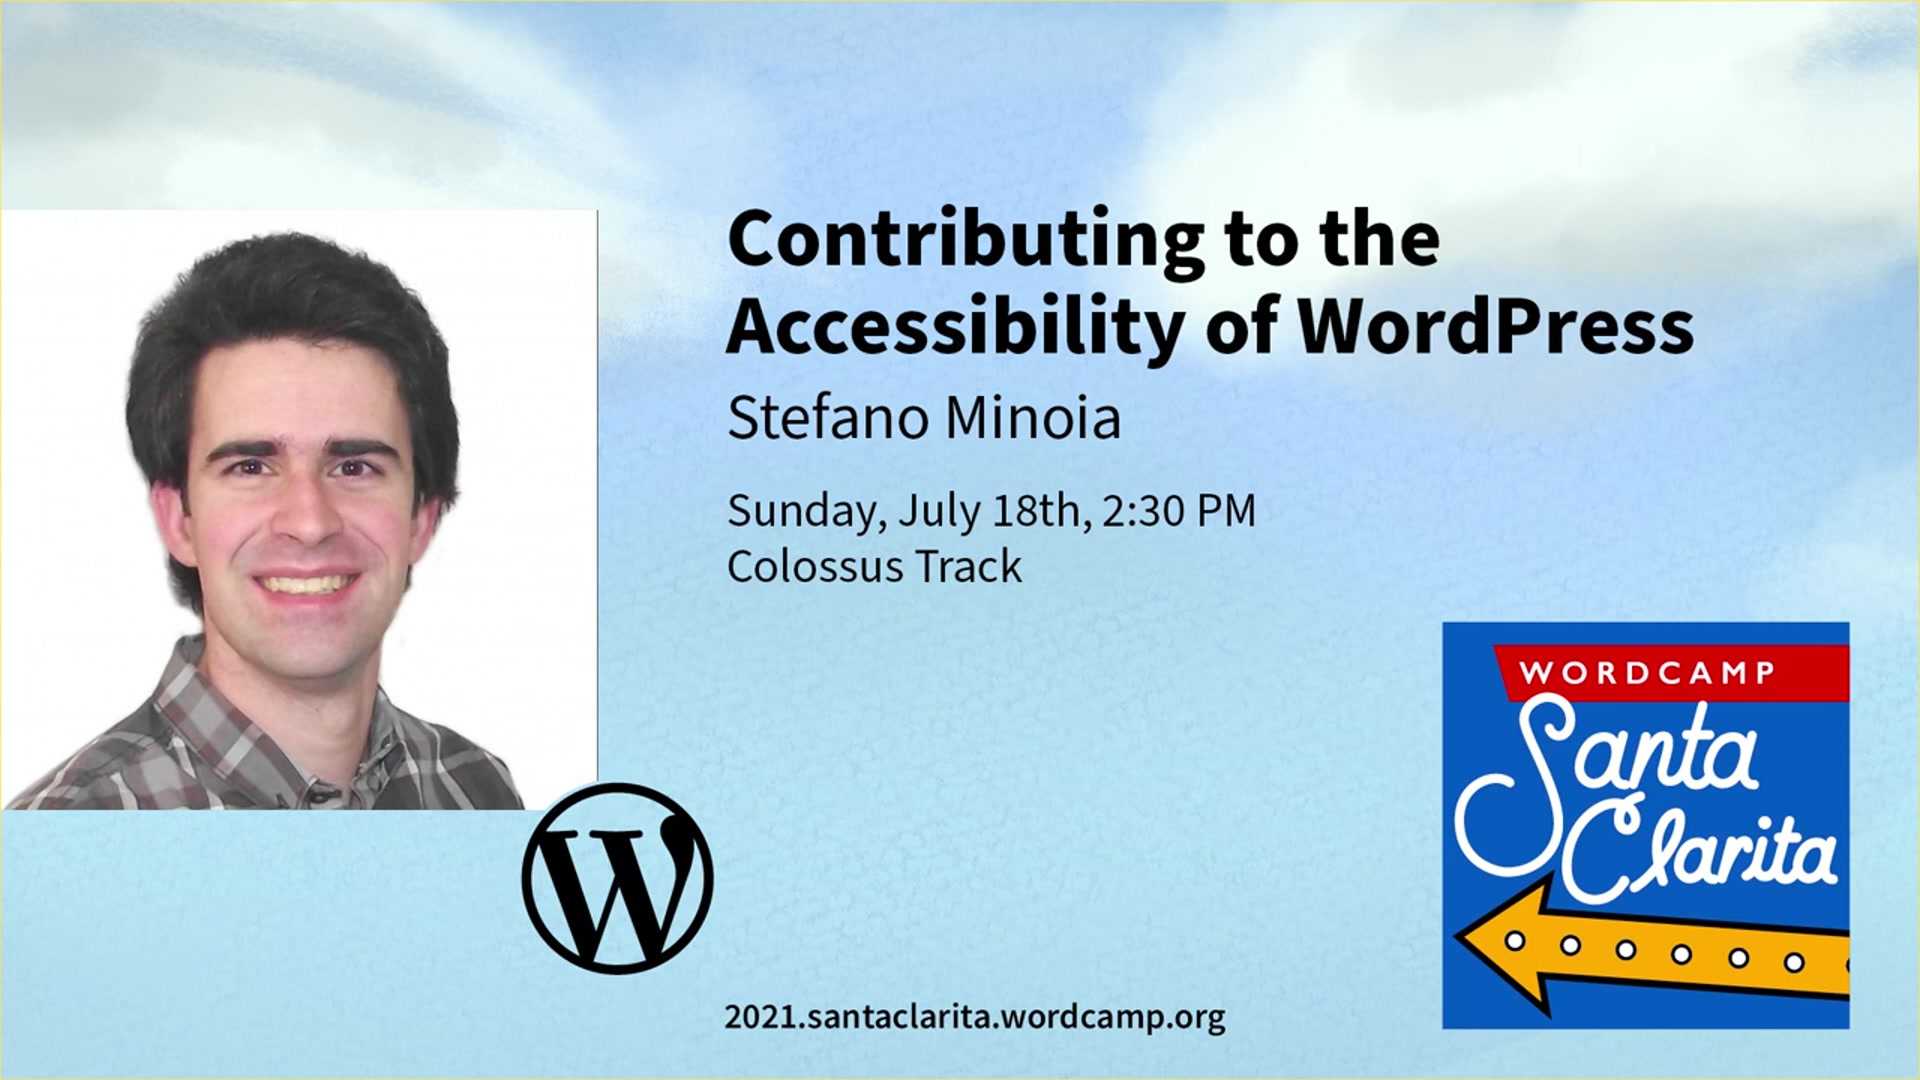 Stefano Minoia: Contributing to the accessibility of WordPress